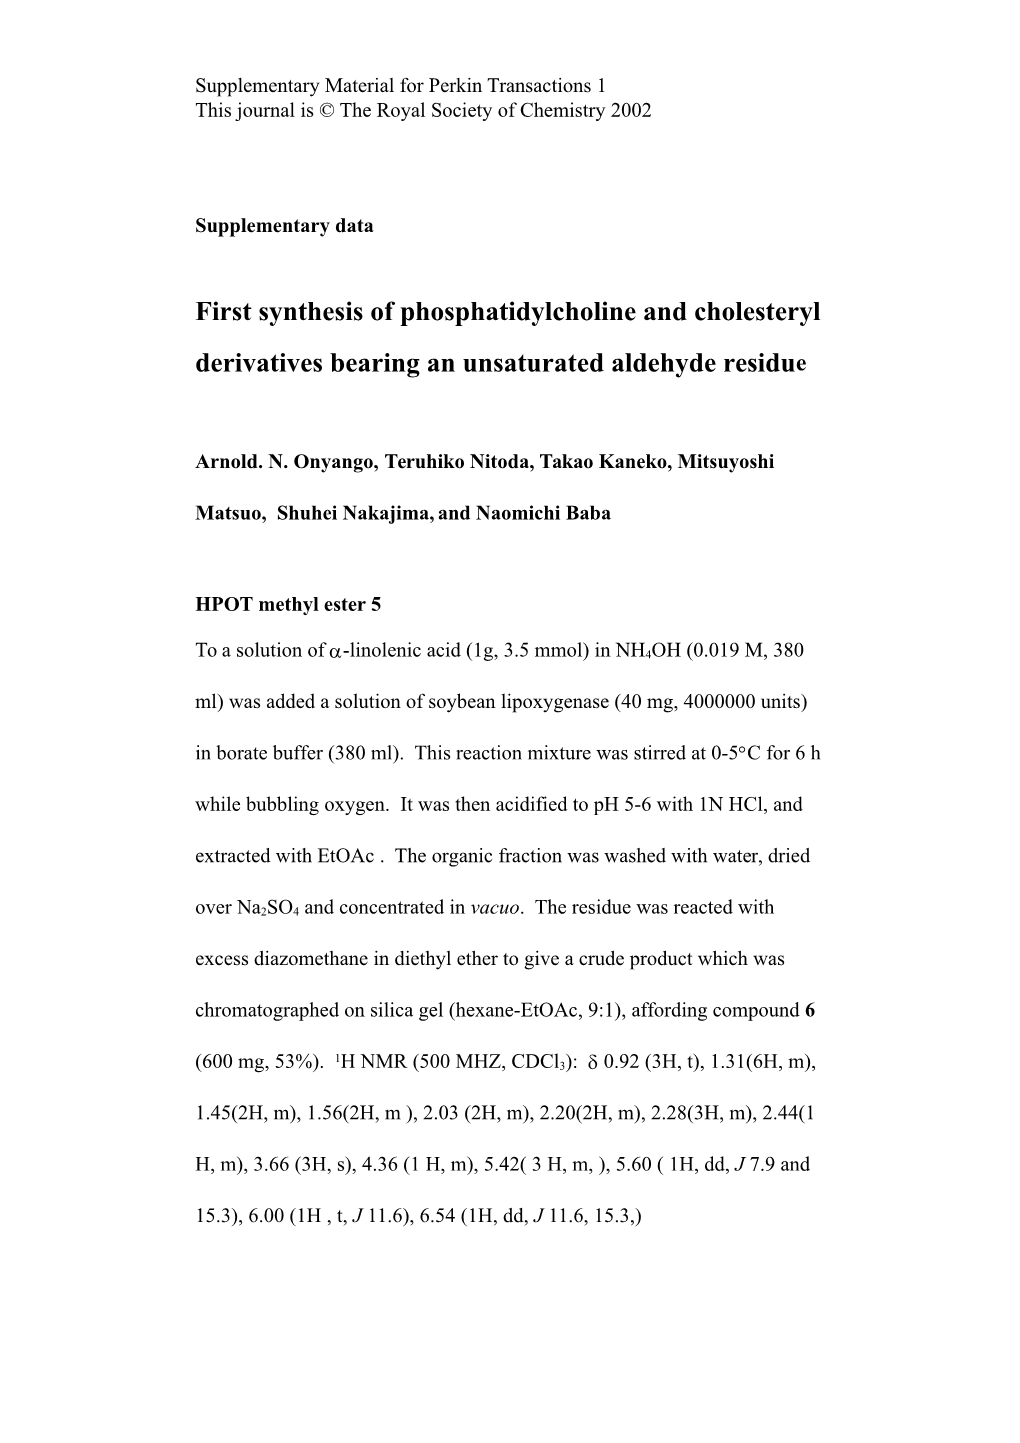 Synthesis of an Unsaturated Aldehyde-Containing Phosphatidylcholine Or Cholesteryl Ester